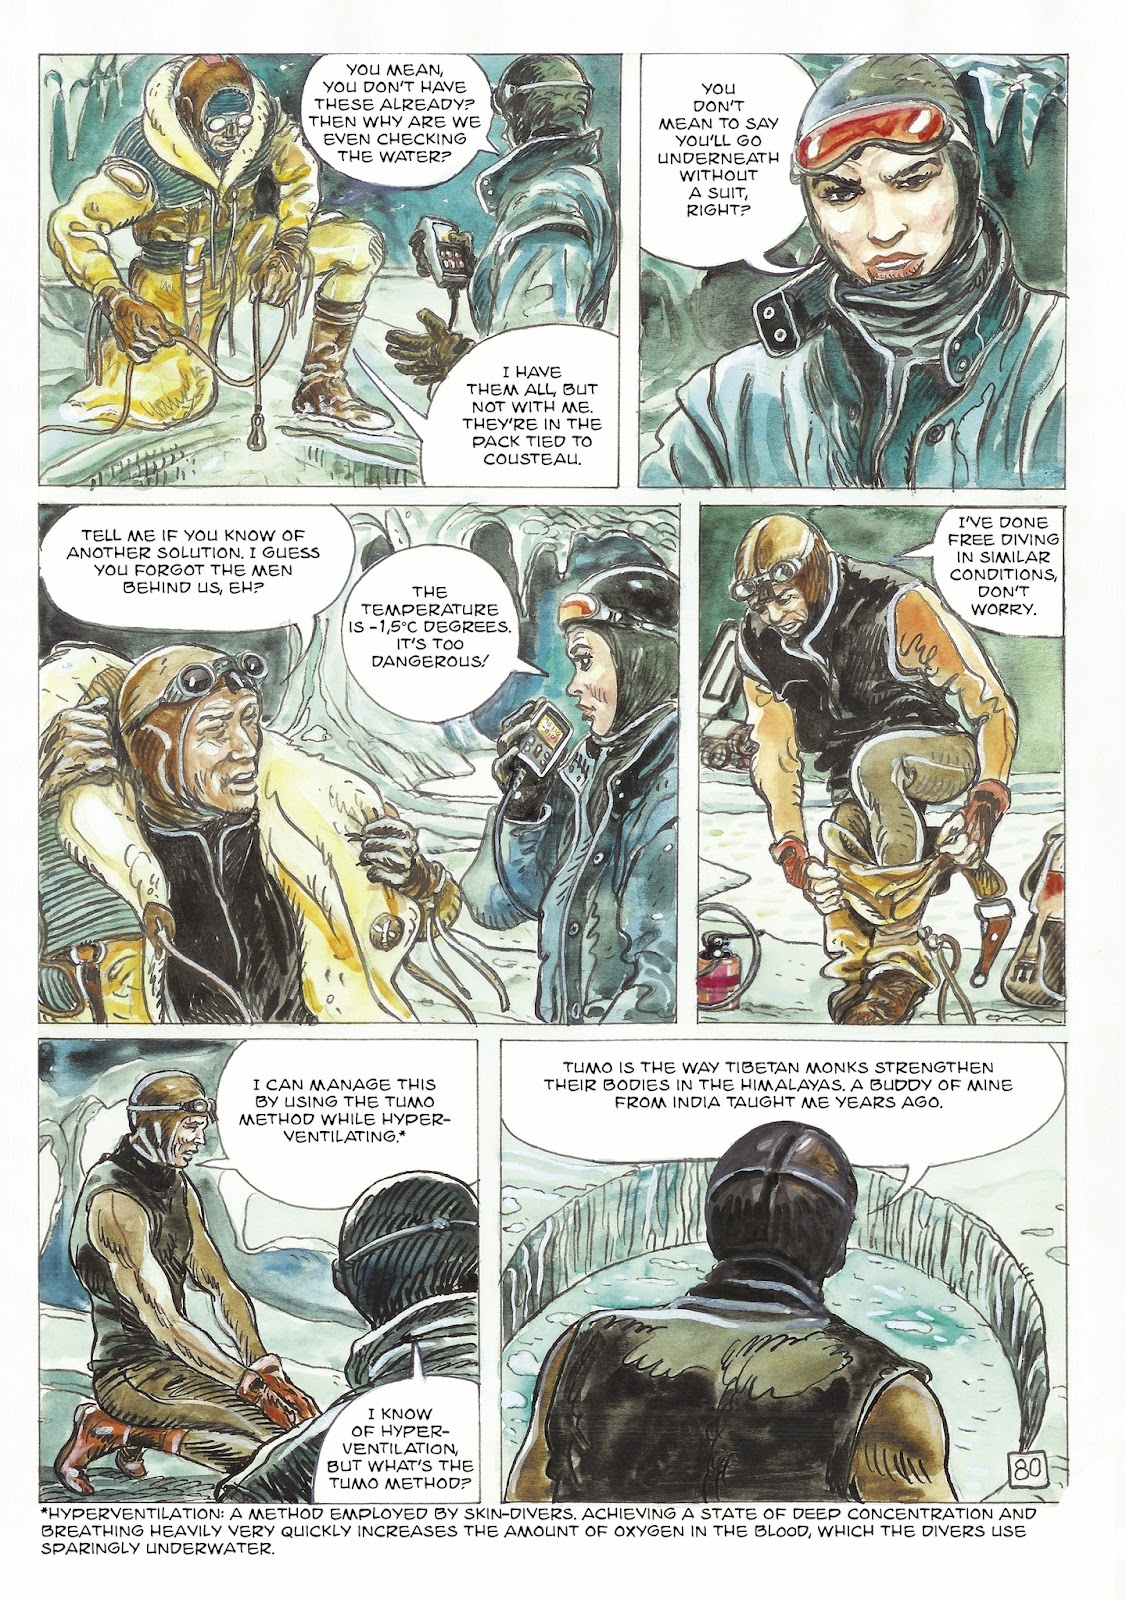 The Man With the Bear issue 2 - Page 26